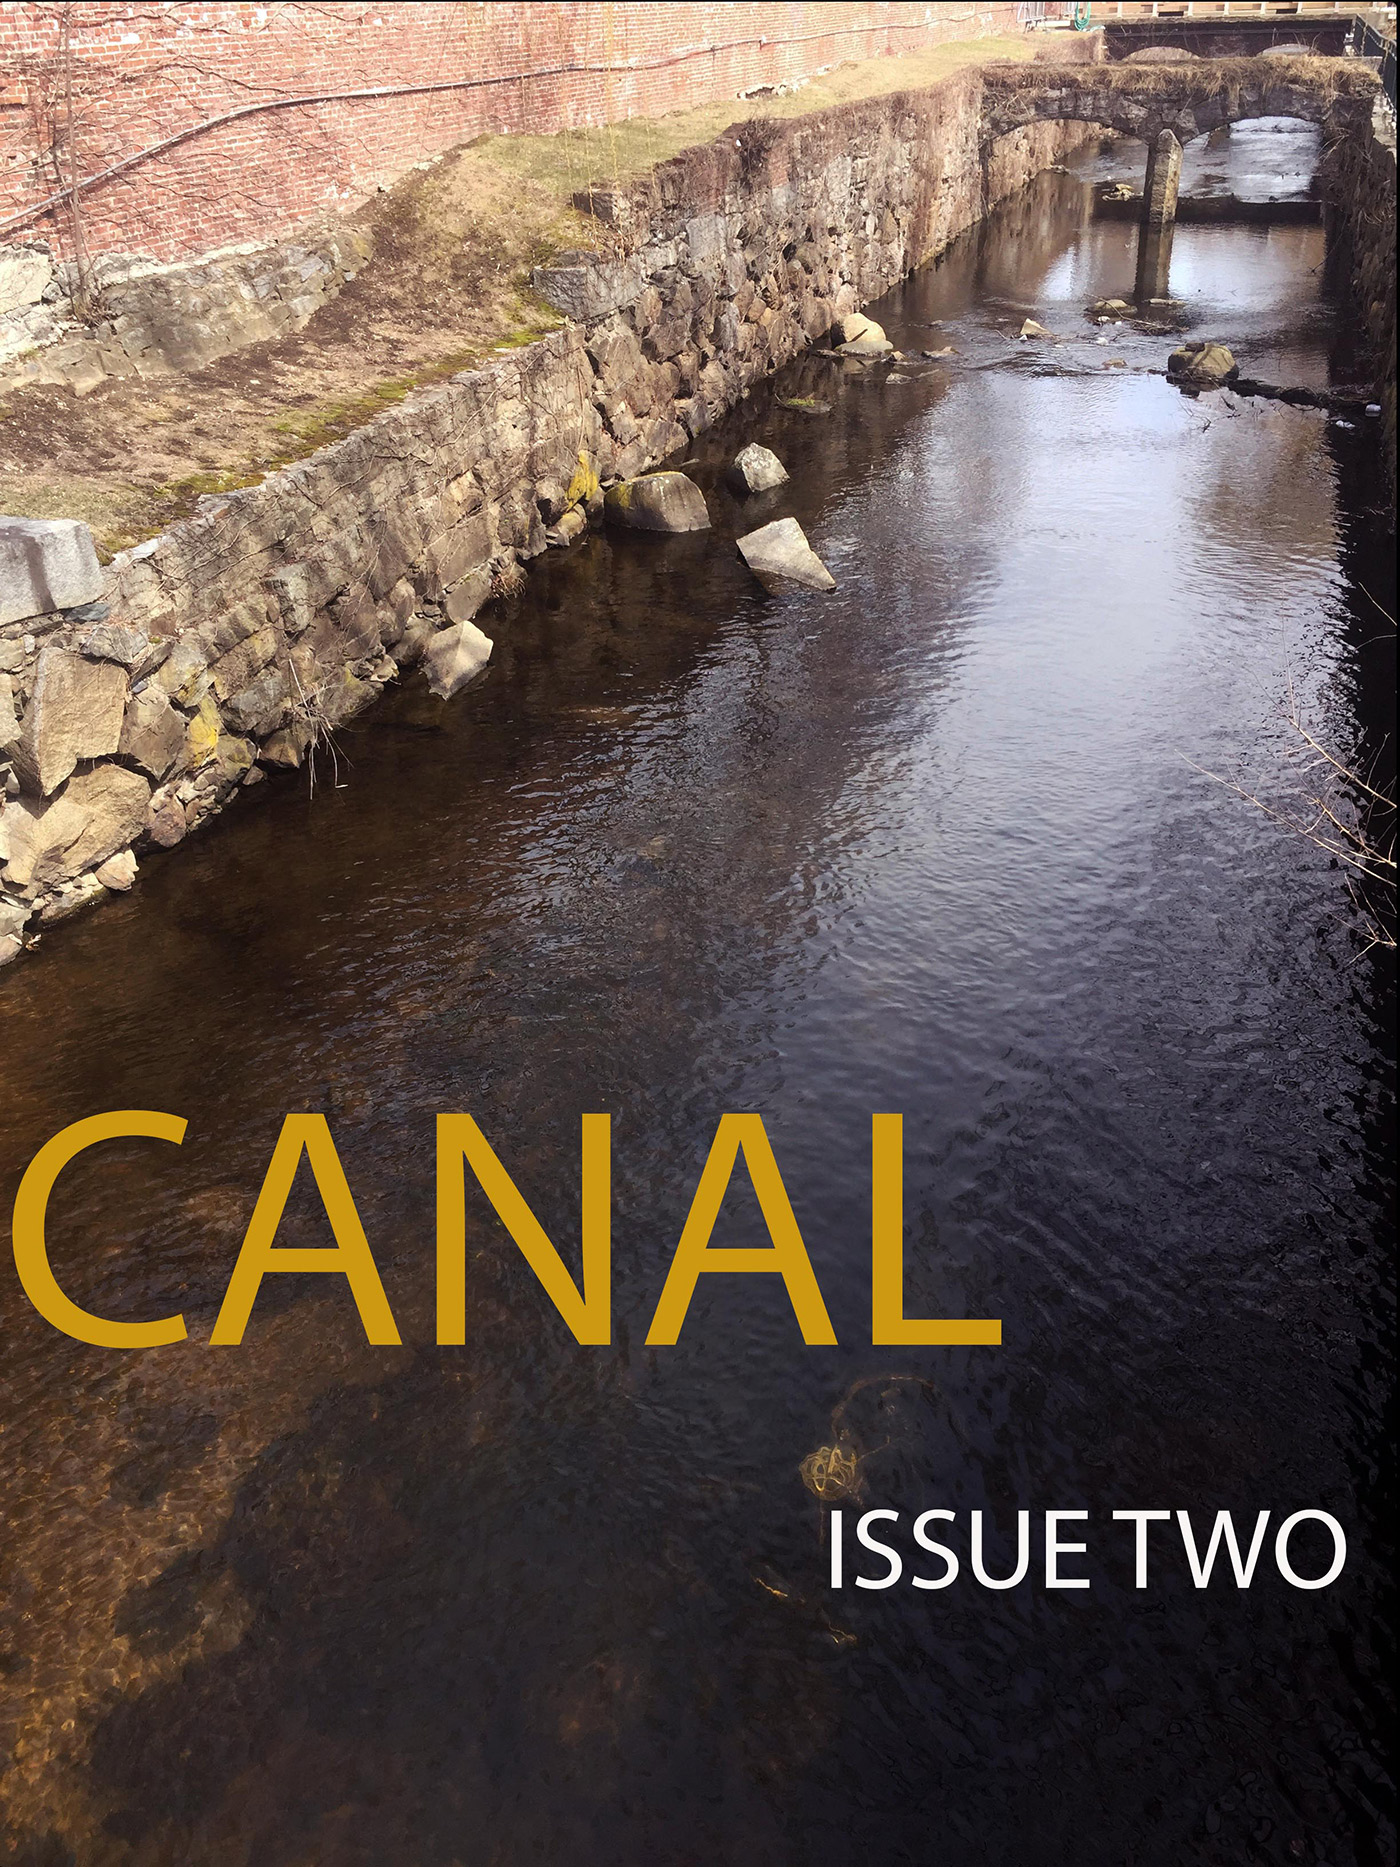 canal-issue2-cover-1400-opt.jpg